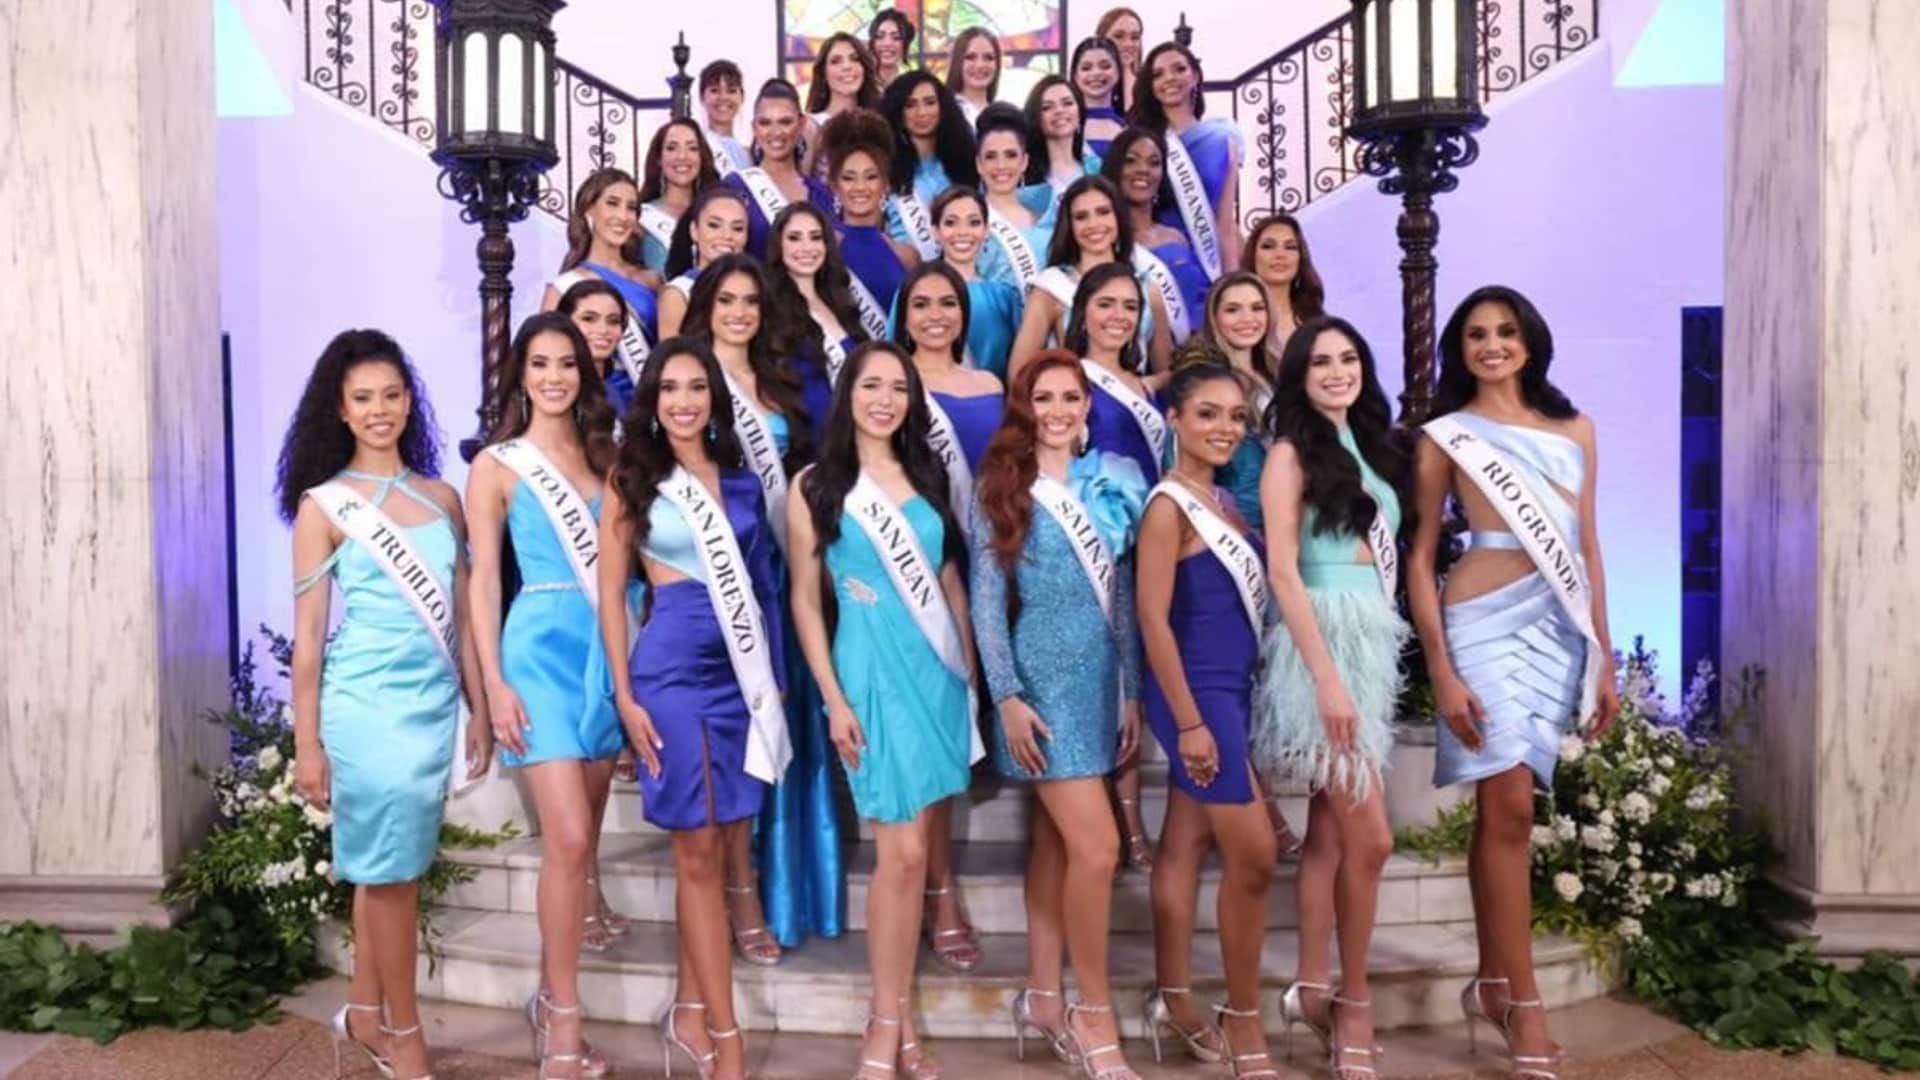 Three mothers, a married woman, and a transgender woman will compete during the 2023 edition of Miss Universe Puerto Rico